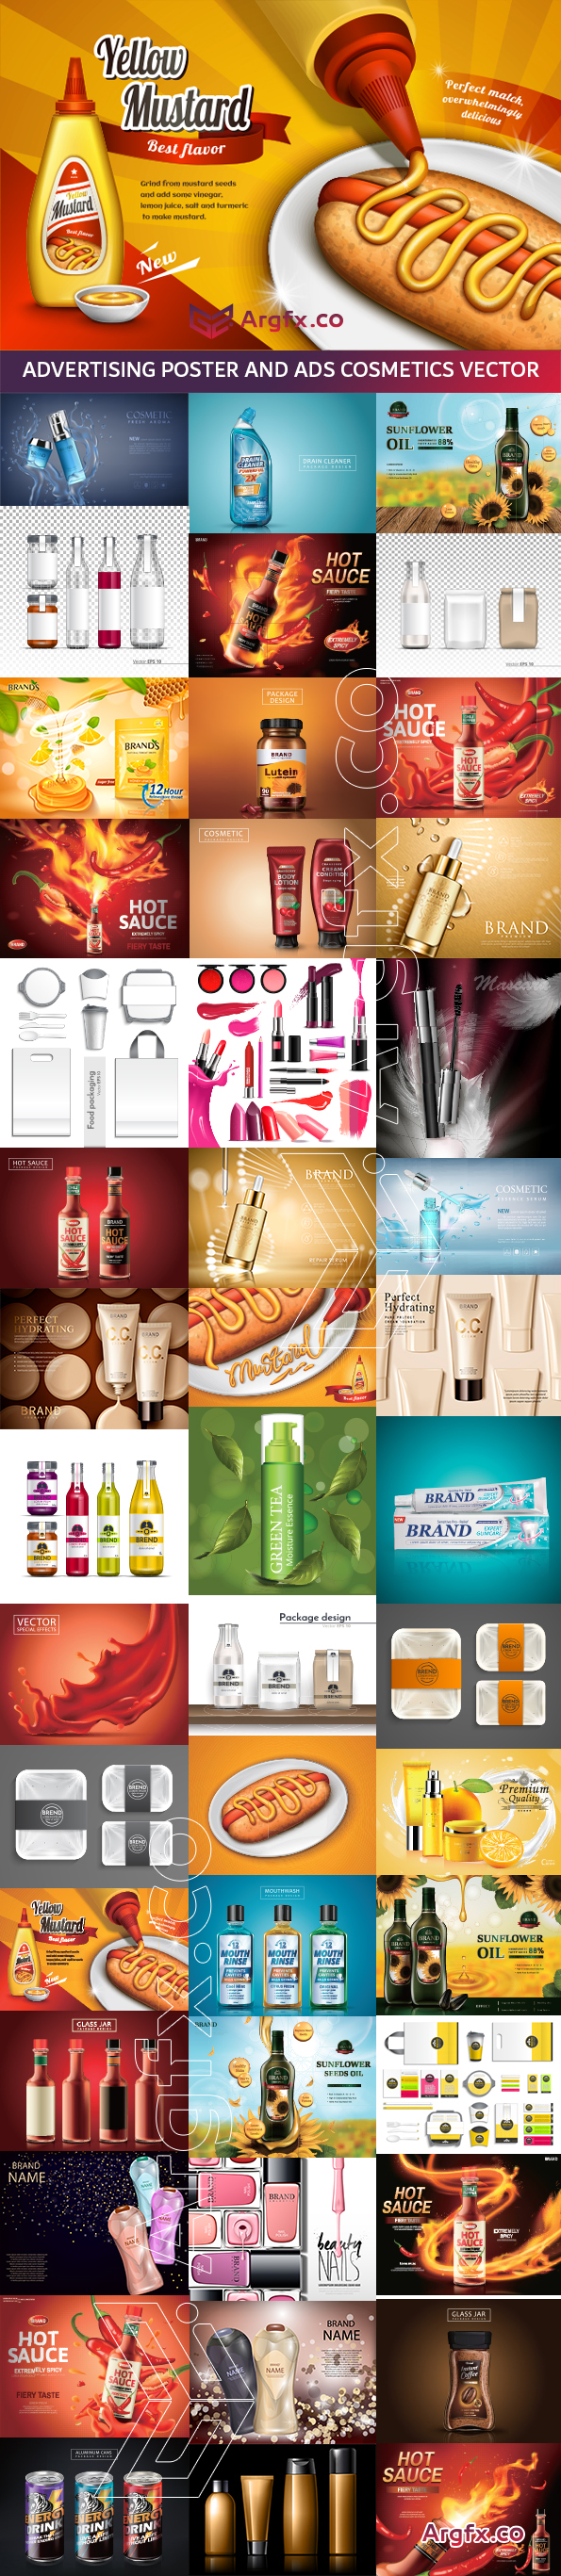  Advertising Poster and ads Cosmetics vector